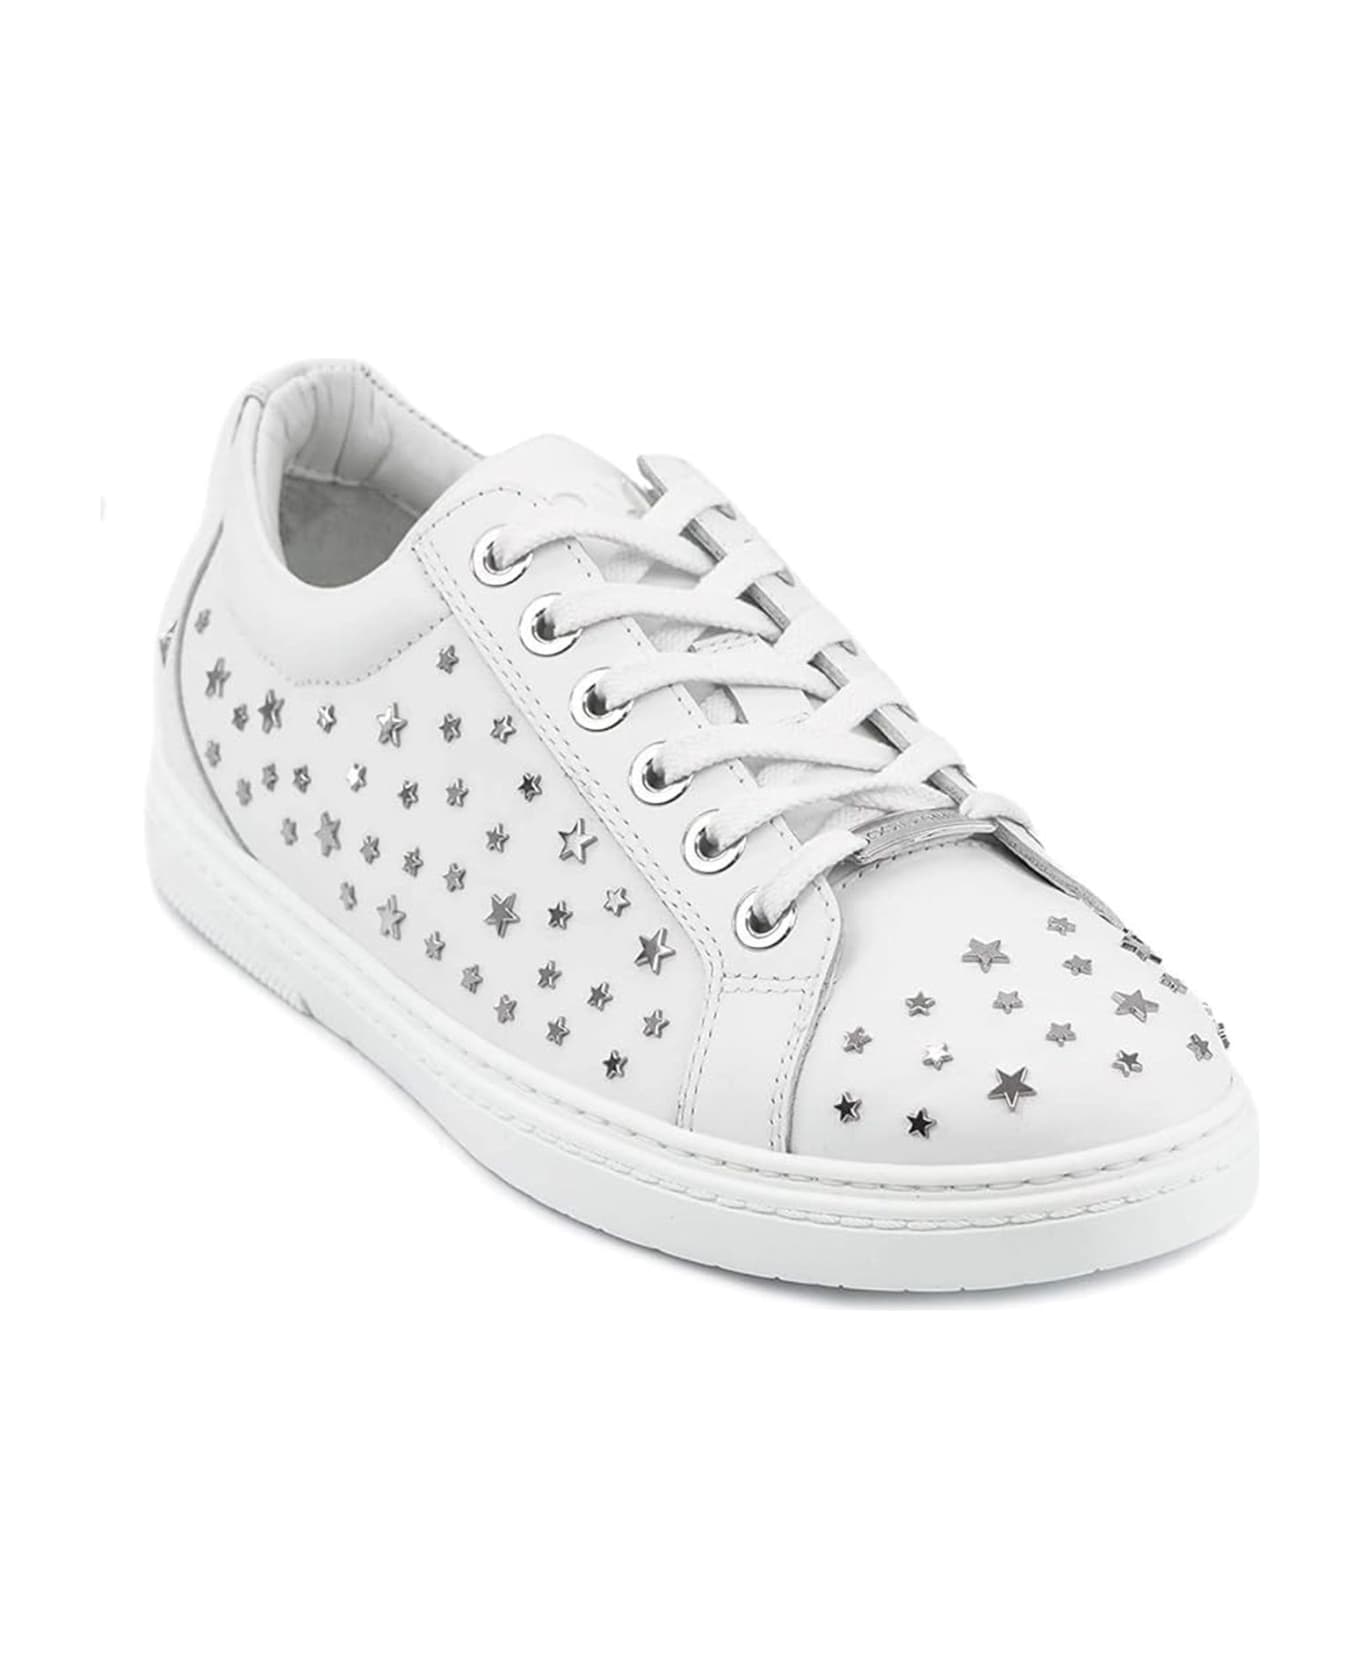 Jimmy Choo Cash Star Leather Sneakers - White